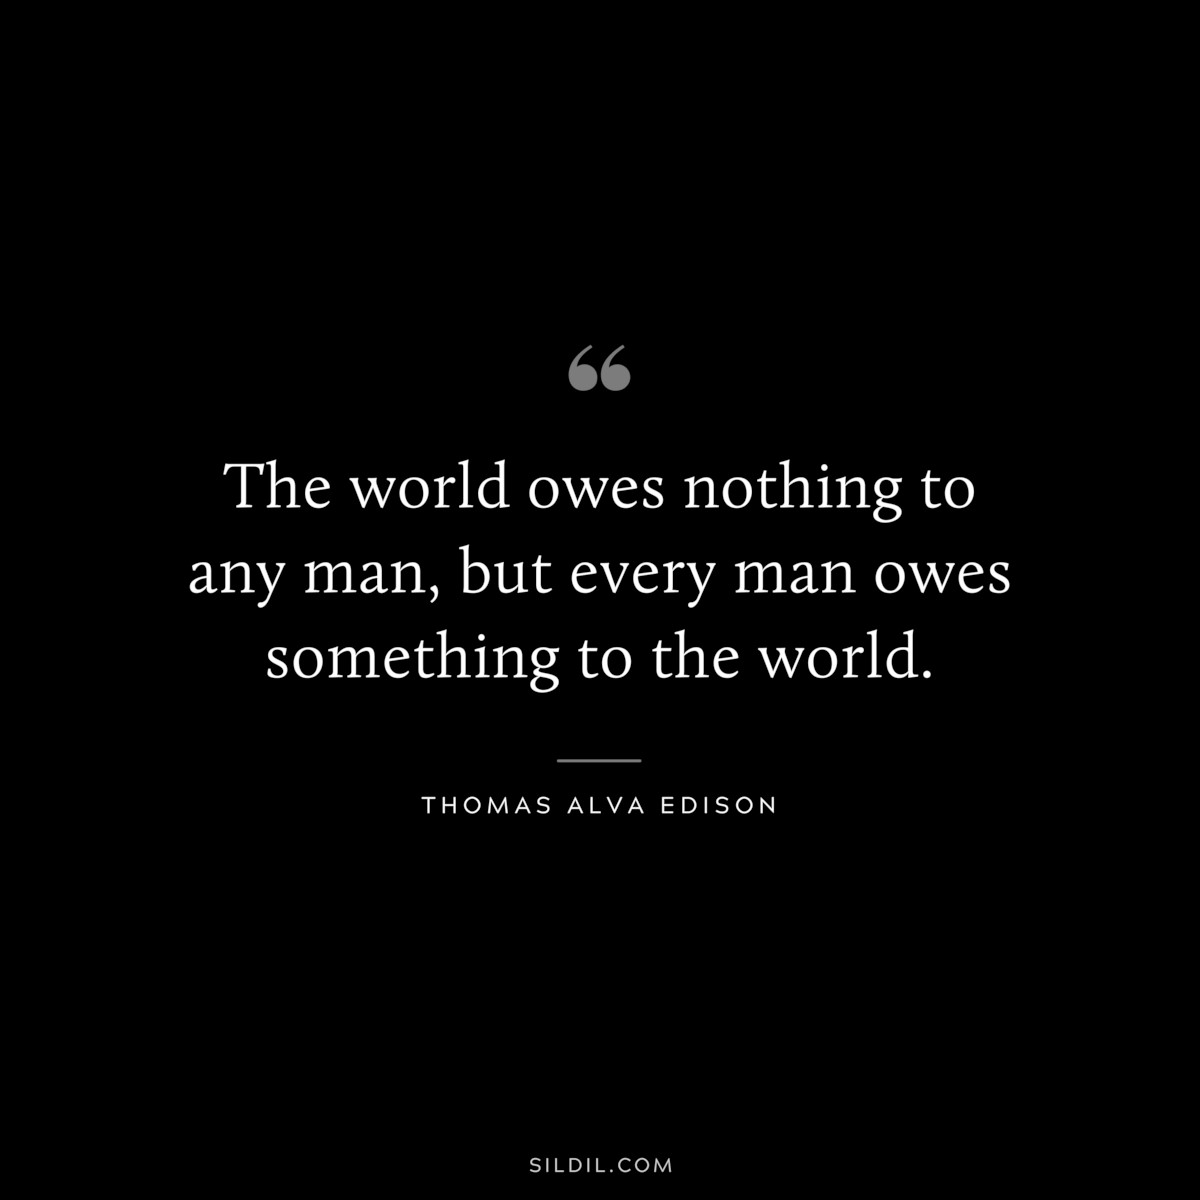 The world owes nothing to any man, but every man owes something to the world. ― Thomas Alva Edison